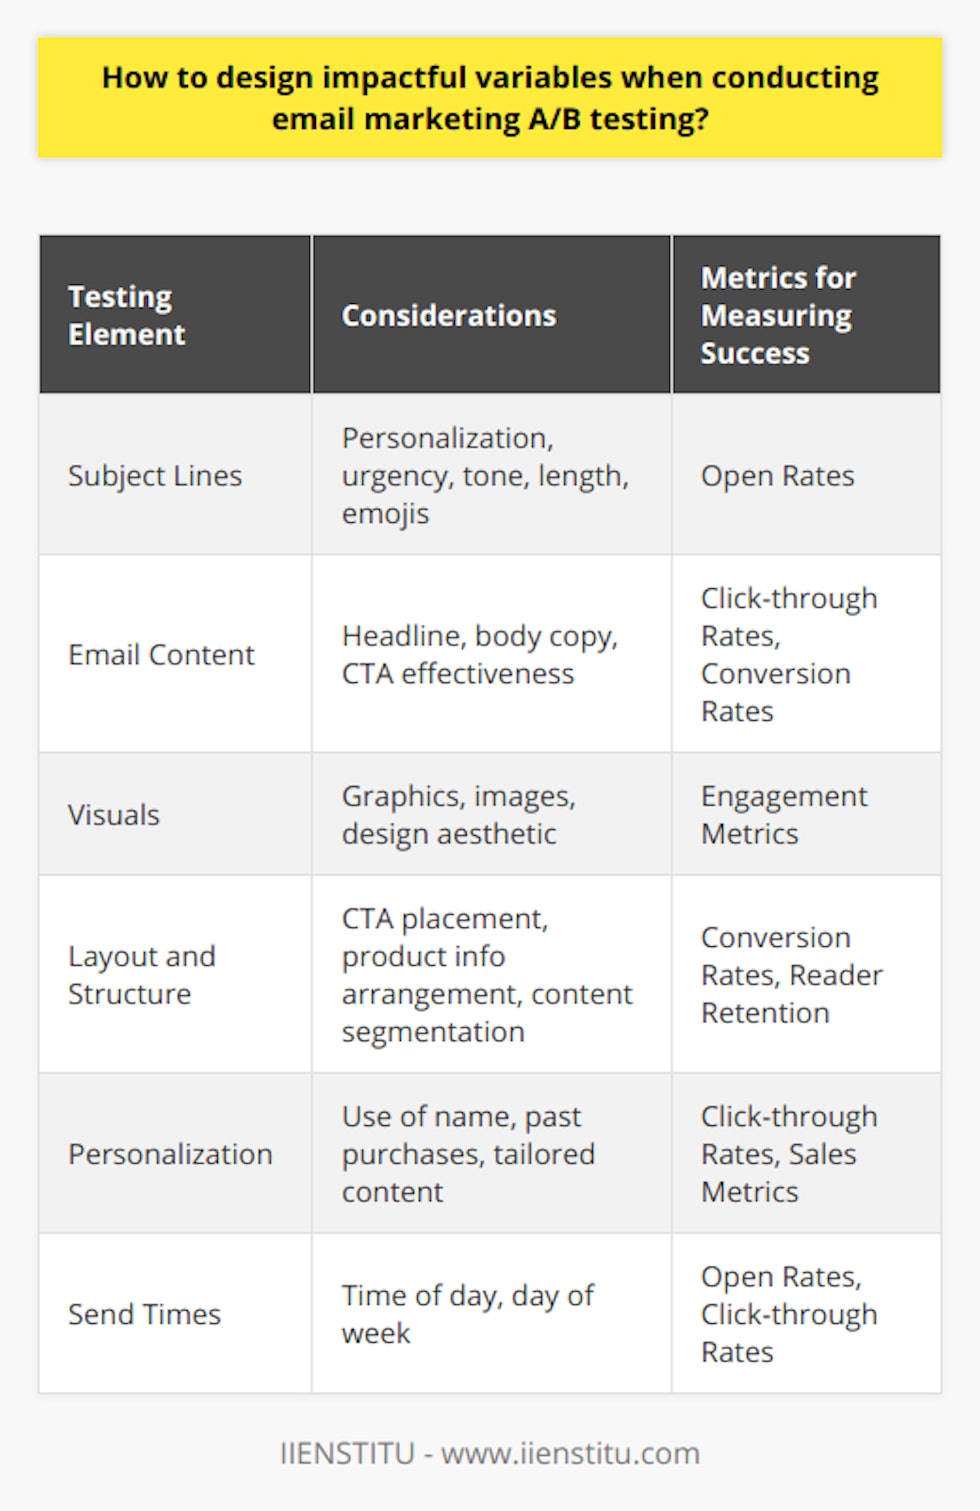 Designing impactful variables for A/B testing in email marketing is a meticulous task that can significantly enhance the effectiveness of a campaign by providing insightful data on customer preferences and behavior. To construct a robust test, one must have an in-depth understanding of their target demographic and a sharp focus on the elements that could lead to meaningful improvements in performance.Understanding Your AudienceThe foundation of successful A/B testing is grounded in a marketer's understanding of the target audience. Analyzing past interactions, purchasing history, and general demographic information can shed light on the preferences and behaviors of the audience. By translating this understanding into hypotheses, marketers can pinpoint opportunities to sway consumer behavior through targeted tests.Key Elements to TestOnce informed by audience knowledge, marketers can identify potential test variables that could make a significant impact. The most common and measurable elements include:1. **Subject Lines**: A compelling subject line can dramatically affect open rates. This is where creativity merges with data – marketers can test personalization, urgency, tone, length, and even the strategic use of emojis.2. **Email Content**: The actual body of the email offers numerous variables for testing, from the headline and body copy to calls-to-action (CTAs). The goal is to determine the messaging that resonates best with the audience.3. **Visuals**: Graphics, images, and overall design aesthetic play a crucial role in engaging the reader. Marketers can experiment with different imagery or graphical styles to see which generates a stronger connection.4. **Layout and Structure**: The organization of information within the email can influence how the reader processes the content. Layout testing can involve the placement of CTAs, the arrangement of product information, or the segmentation of content for readability.5. **Personalization**: The degree of personalization can be an influential variable. This may involve using the recipient's name, referencing past purchases, or tailoring content based on user behavior.6. **Send Times**: The time of day or week that an email is sent can have a bearing on open and click rates. Testing different send times can pinpoint when recipients are most likely to engage with the content.Single Variable TestingIt becomes vital to test a single element at a time – also known as isolated variable testing – to ensure that any performance differences can be accurately attributed to that one change. Changing multiple aspects of an email simultaneously may lead to ambiguity concerning which variable is driving results.Metrics for SuccessThe effectiveness of each variable is quantified by tracking specific metrics, such as open rates, click-through rates, conversion rates, and any subsequent engagement or sales metrics. This data not only informs the success of the current A/B test but also guides future marketing efforts.Continuously InnovatingLearning from A/B tests is an ongoing process. It is important for marketers to adapt their strategies based on the data, striving for continuous improvement in their campaigns. Such rigorous testing and refinement can elevate email marketing to new levels of precision and effectiveness.To summarize, constructing A/B tests with significant variables is a powerful strategy for optimizing email marketing campaigns. Marketers who invest time in understanding their audience, carefully select specific variables to test, and diligently analyze the outcomes can realize improved performance and, ultimately, greater marketing success.